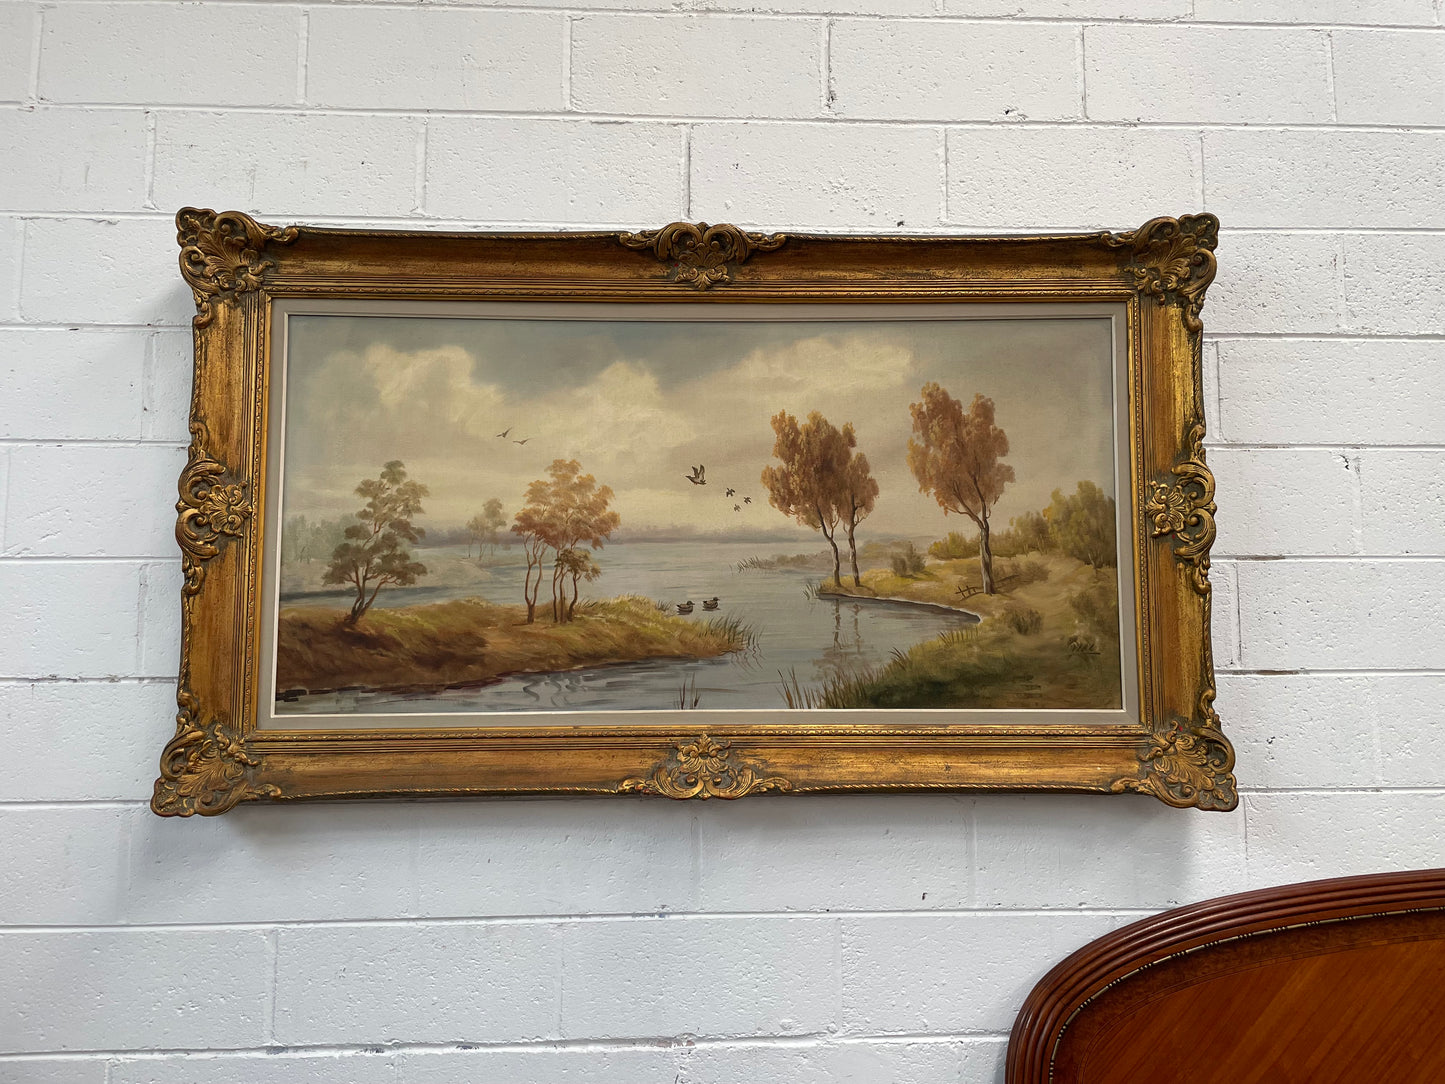 Beautiful large French oil on canvas landscape of a peaceful river scene featuring ducks and trees in a ornate gold frame. Sourced from France and in good original condition.